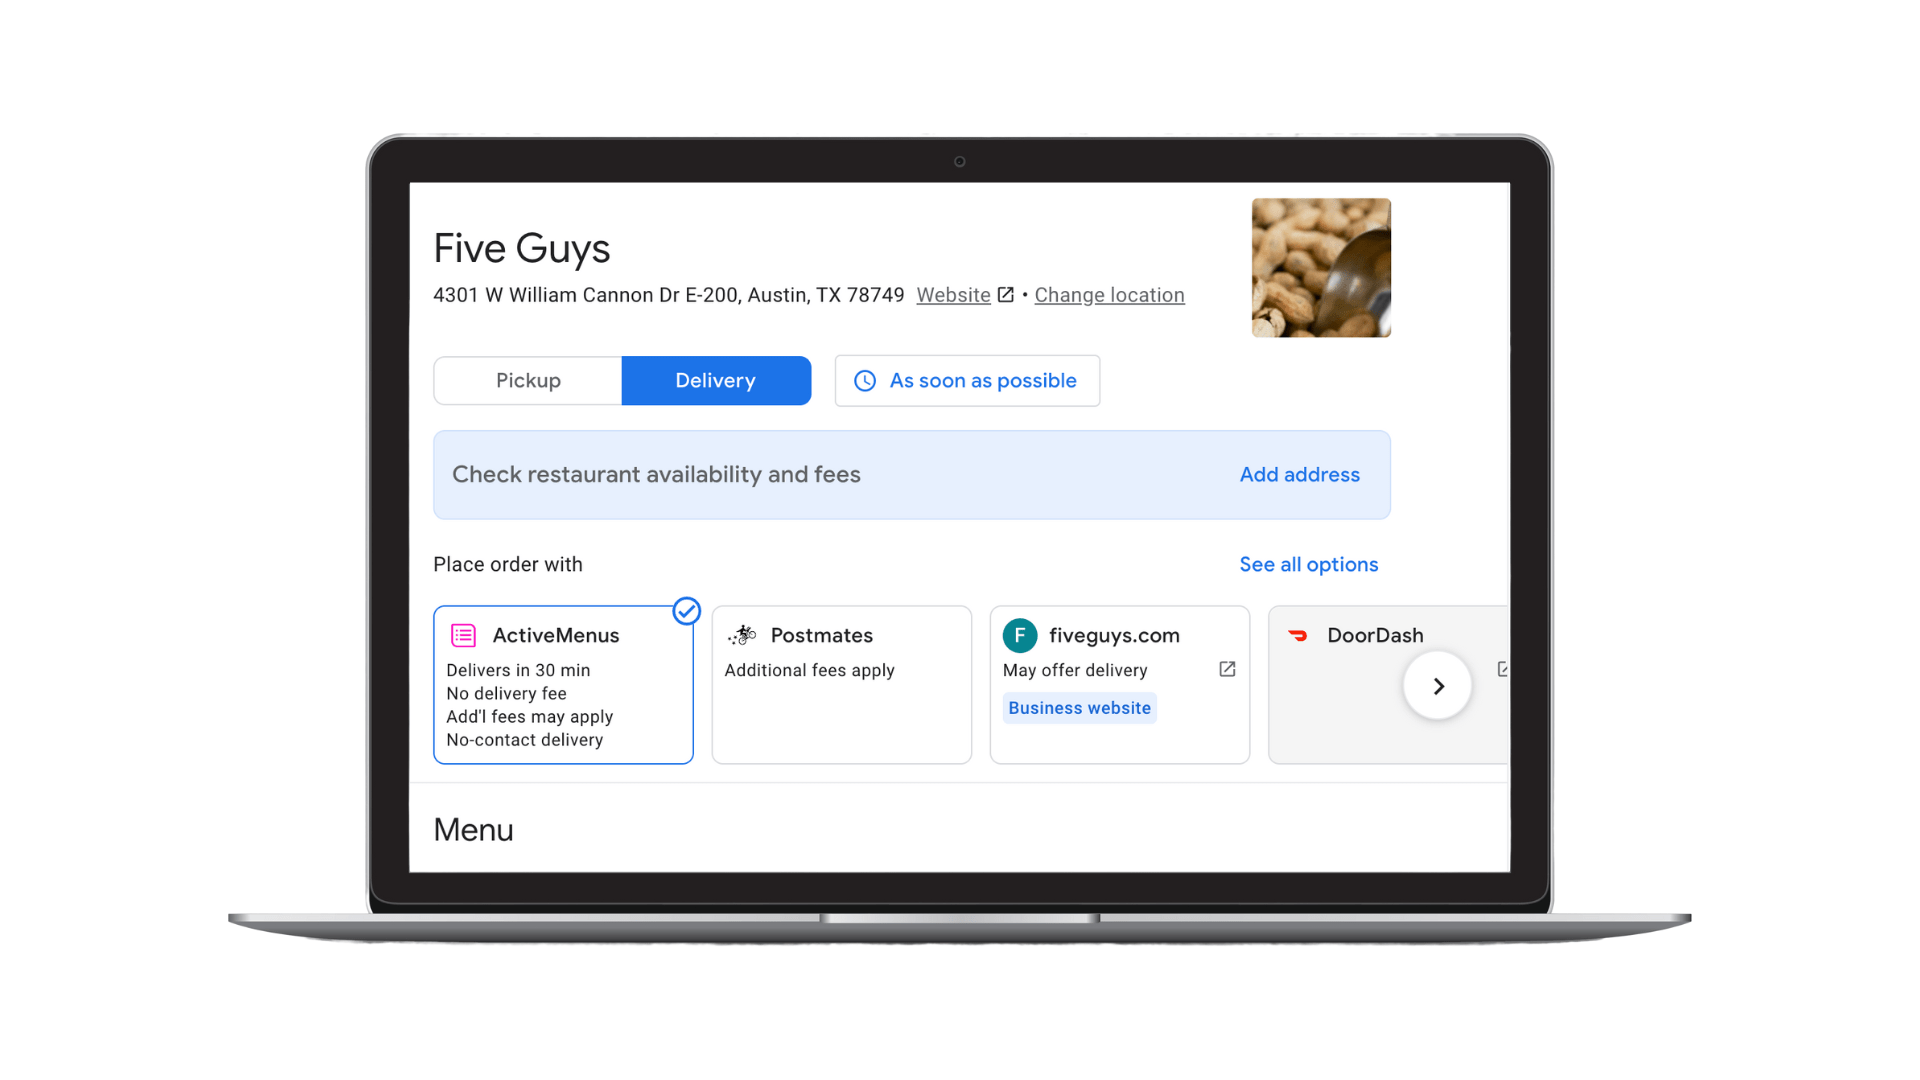 Screenshot of Five Guys online ordering in Google on a laptop